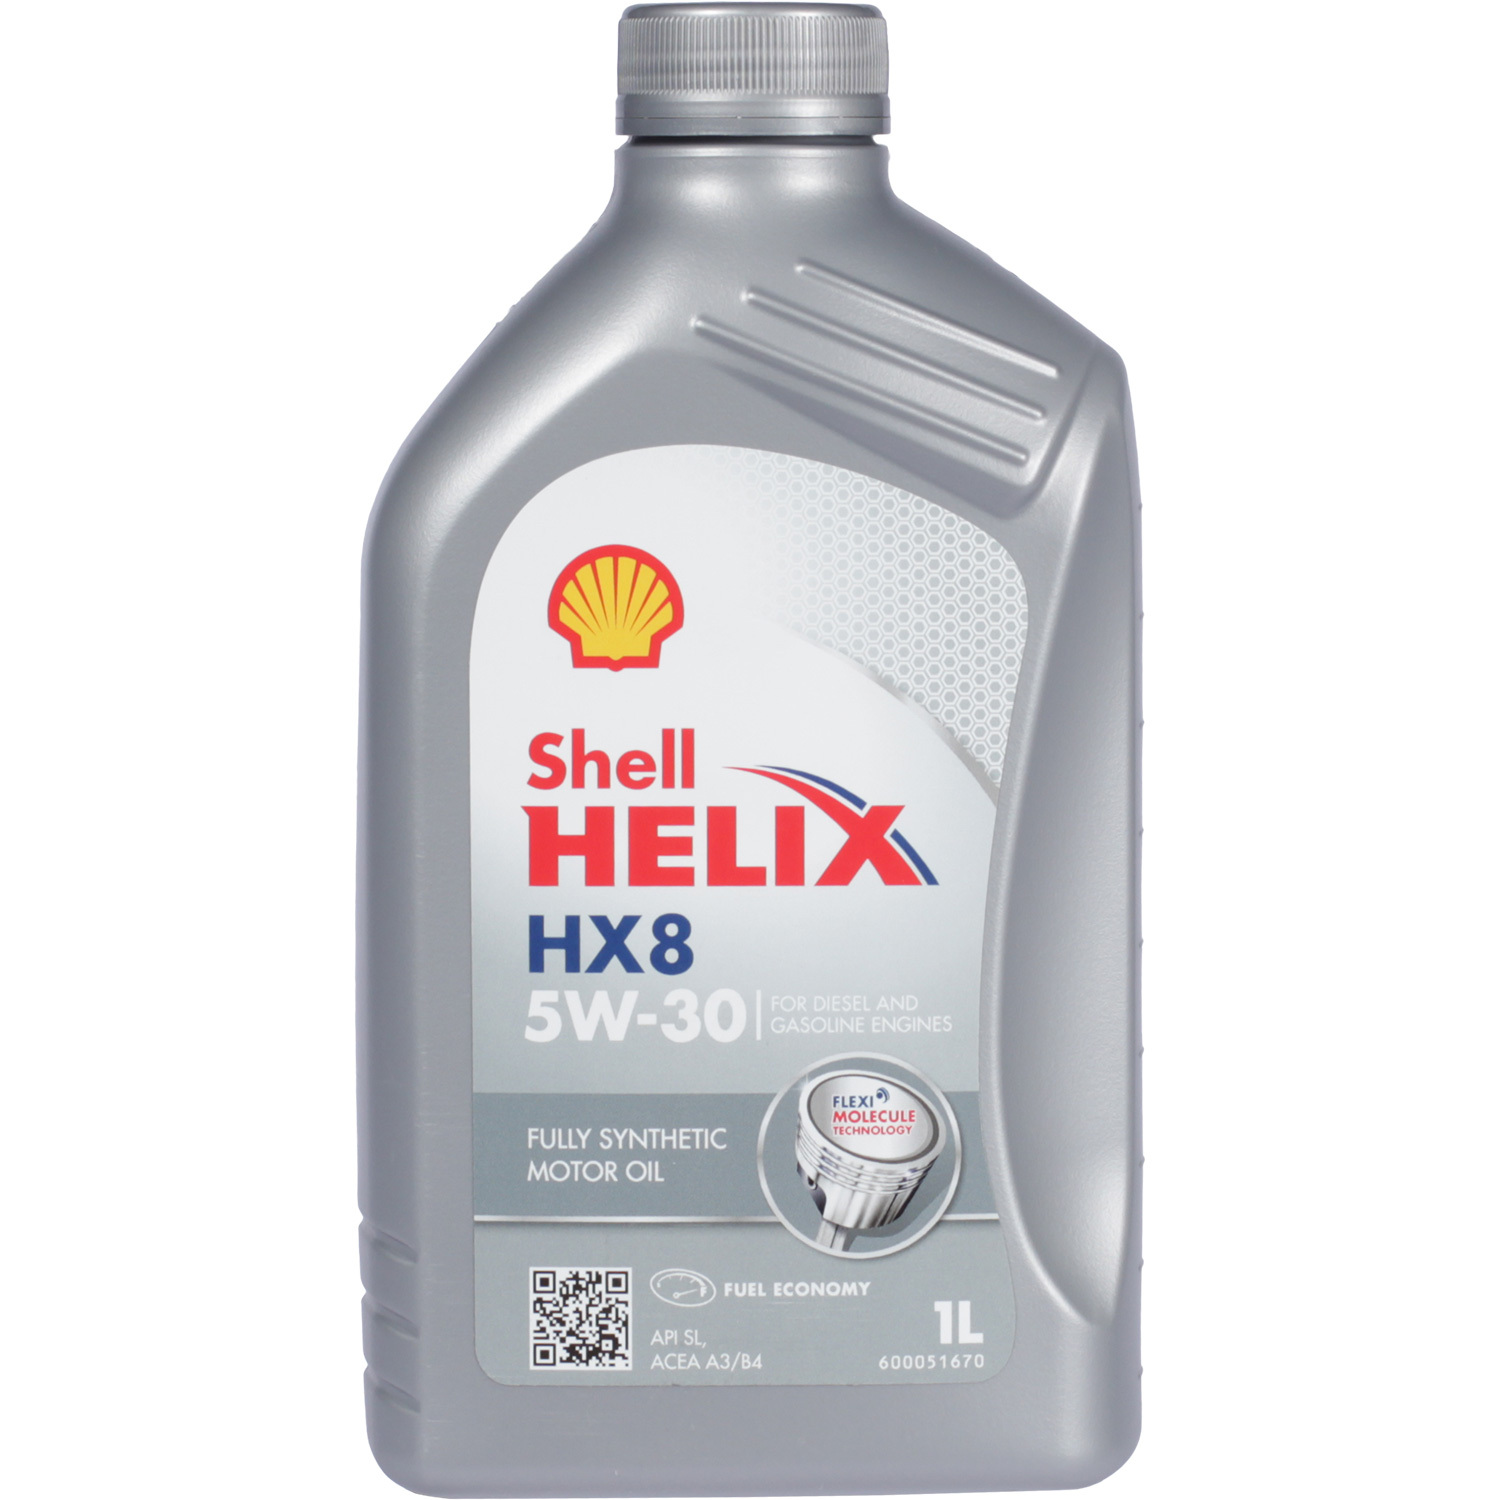 Shell Моторное масло Shell Helix HX8 5W-30, 1 л shell моторное масло shell helix ultra 5w 40 1 л